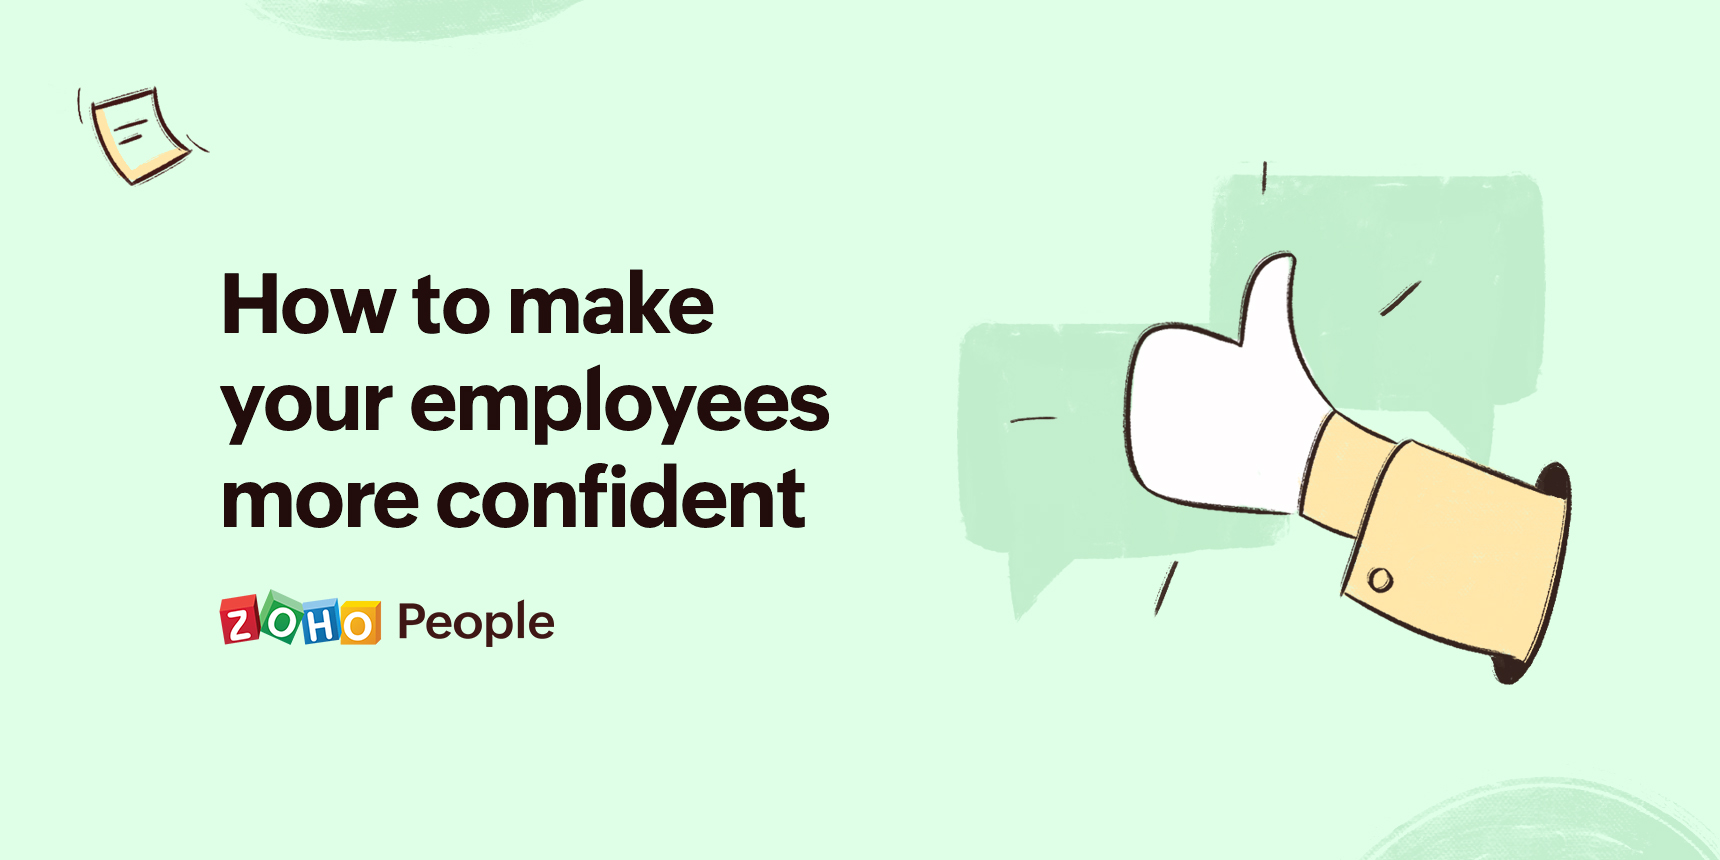 6 tips to build a confident workforce